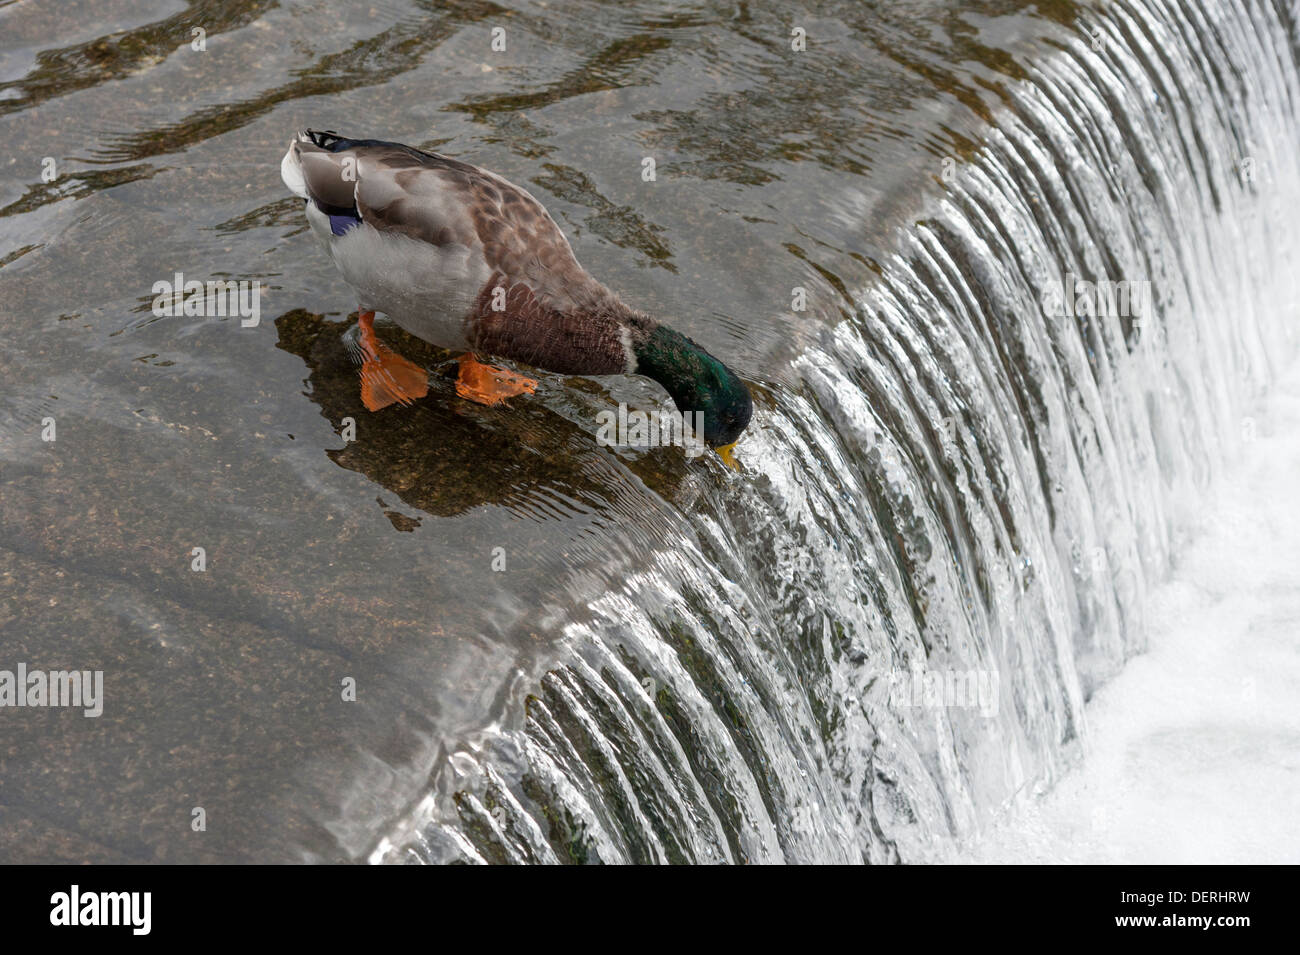 A mallard duck drinking water on the edge of a waterfall in a river. Stock Photo